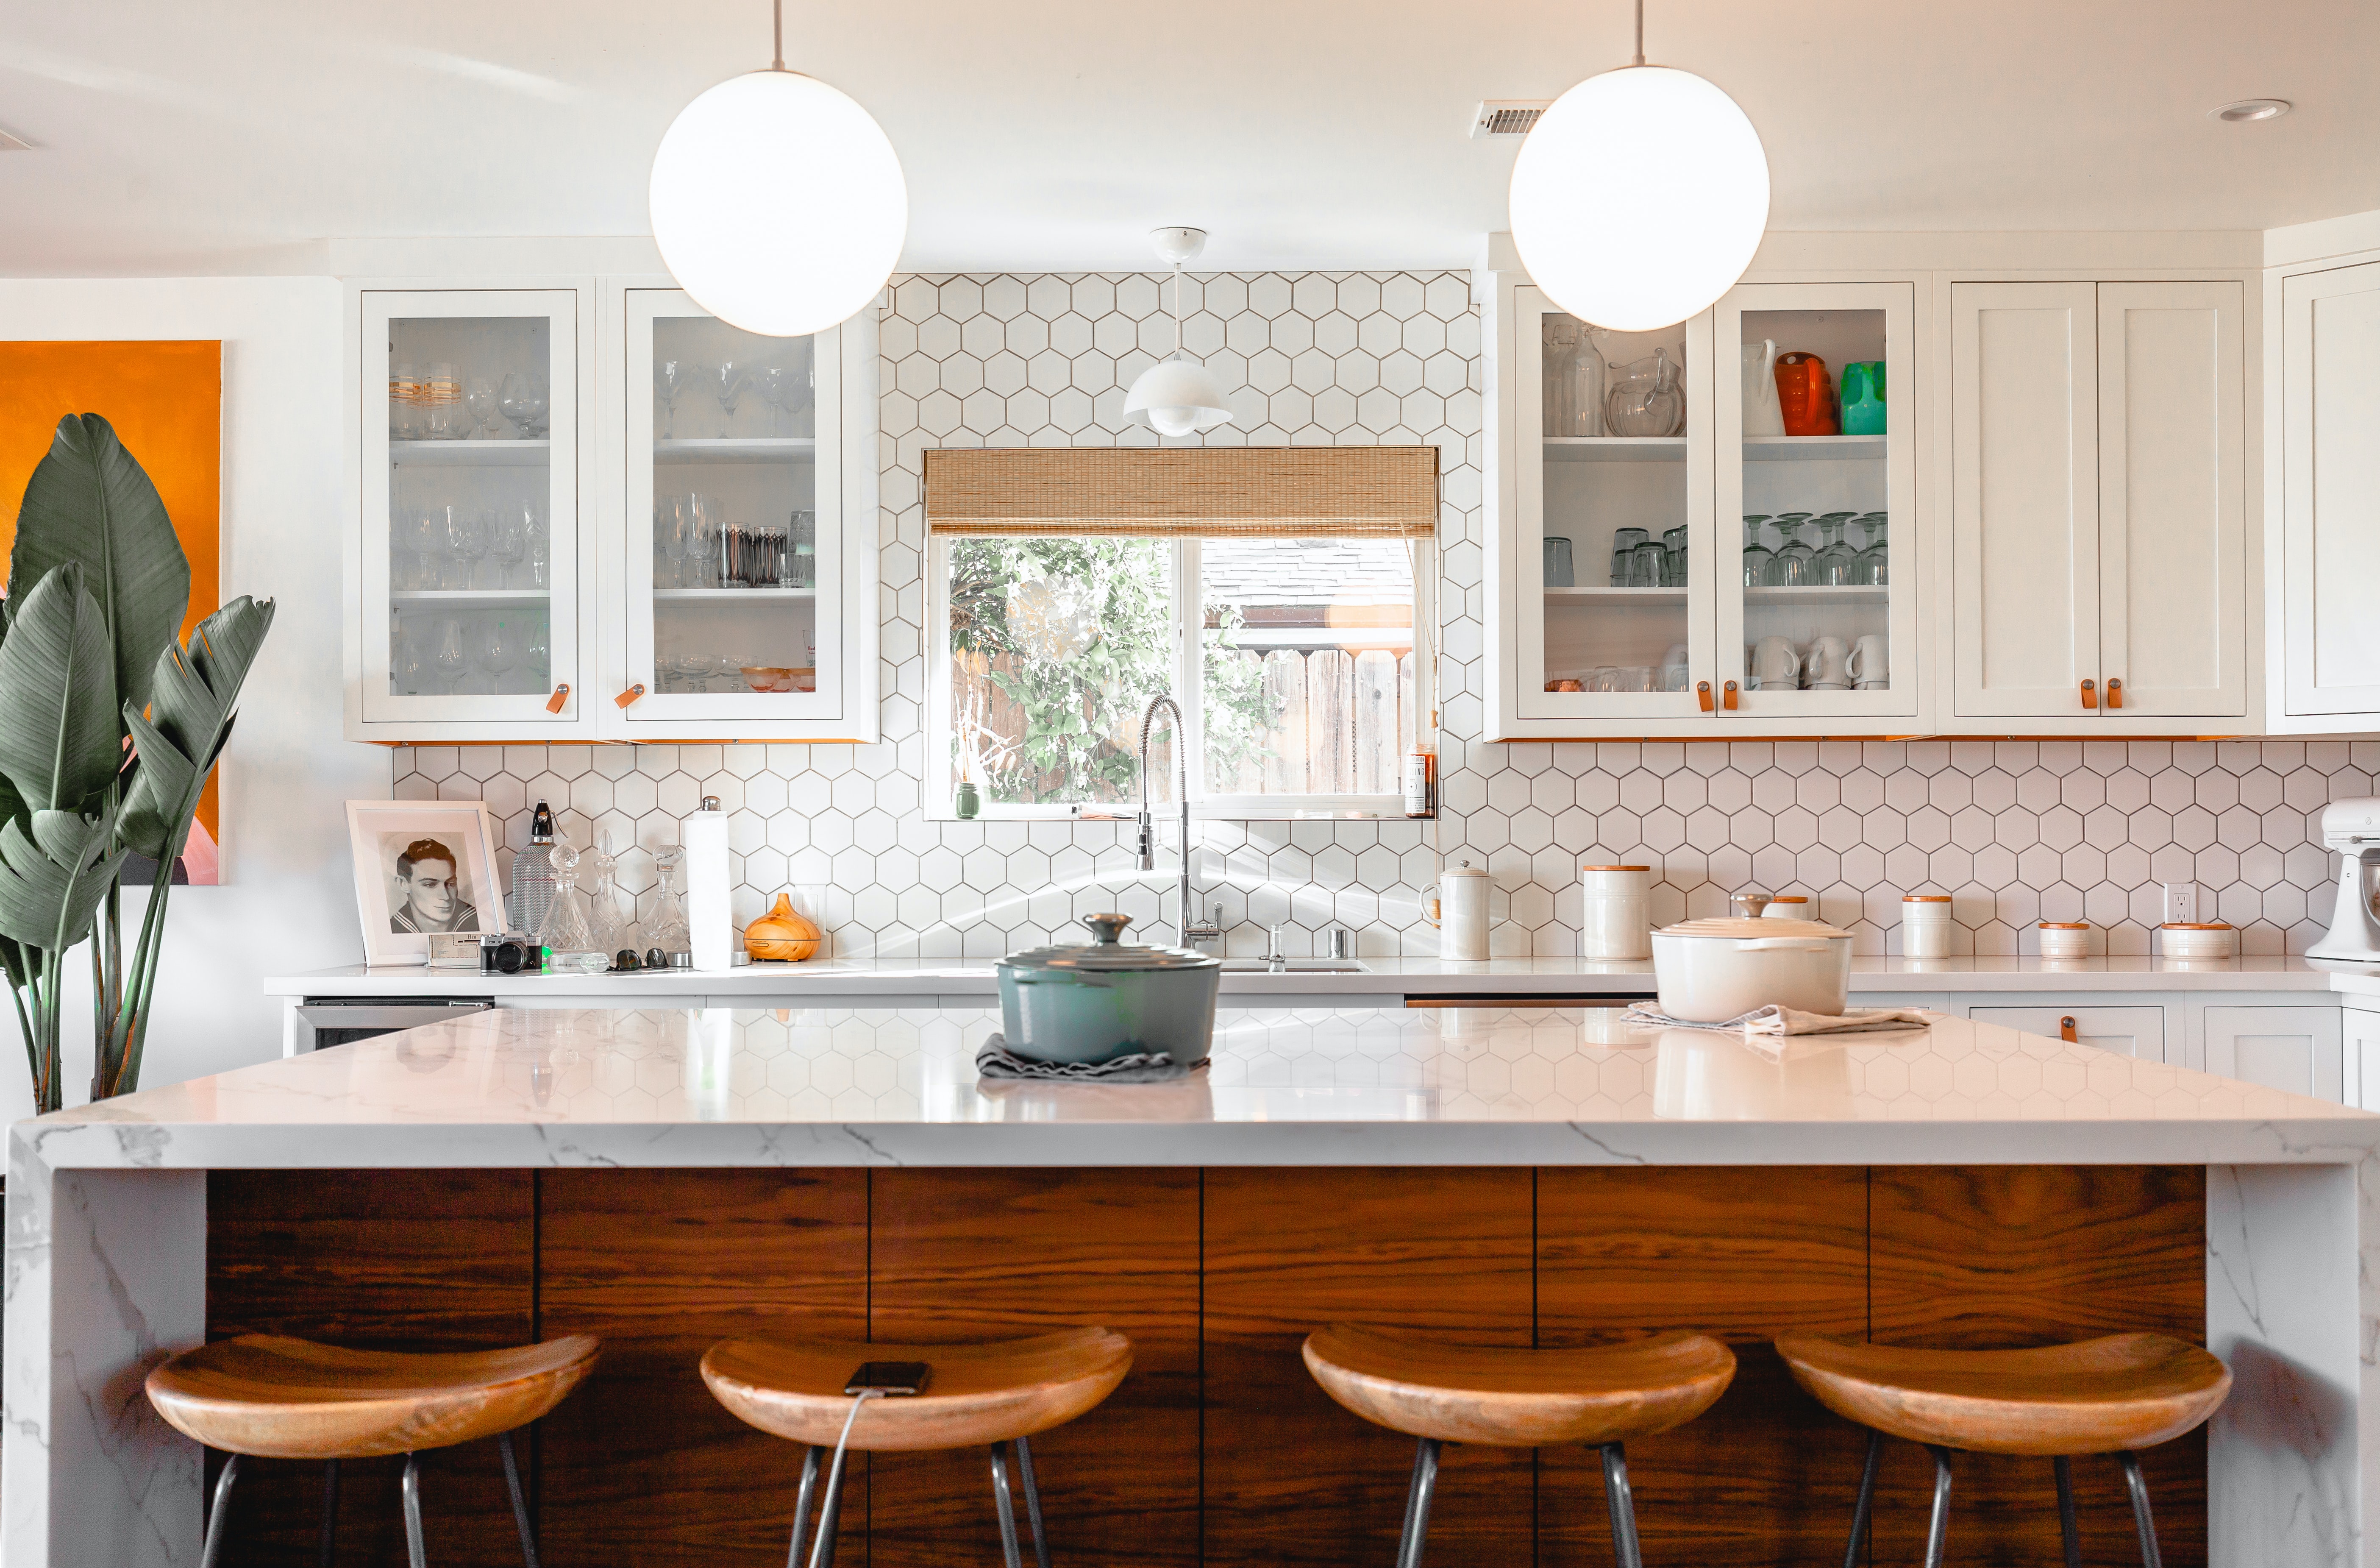 5 Reasons To Renovate Your Kitchen